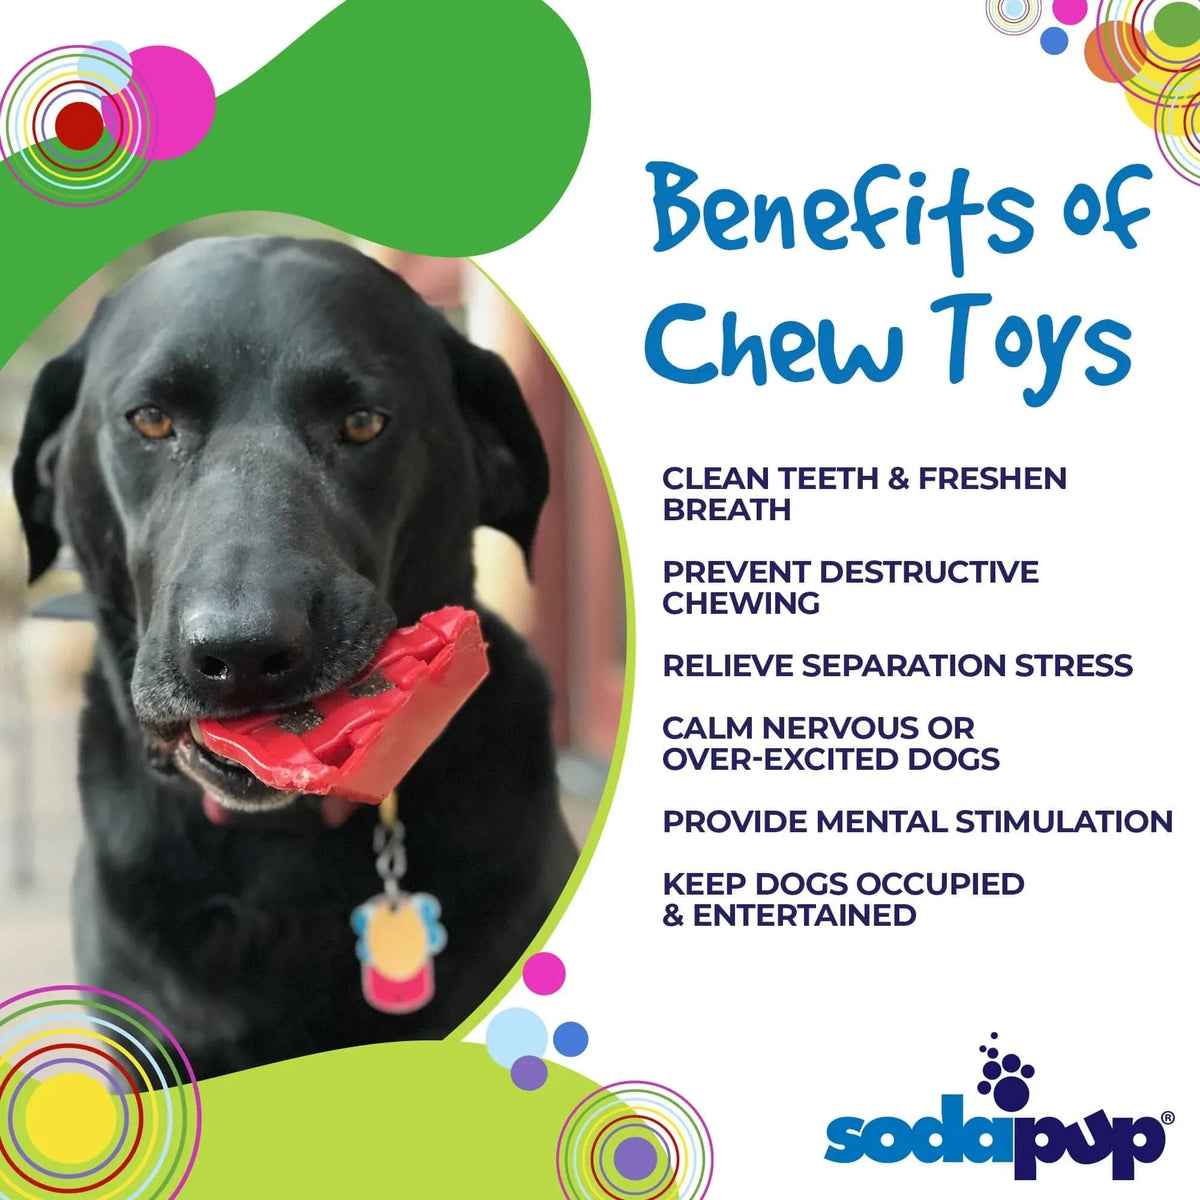 SodaPup/True Dogs, LLC Cherry Pie - Red Cherry Pie Ultra Durable Nylon Dog Chew Toy and Treat Holder by SodaPup/True Dogs, LLC